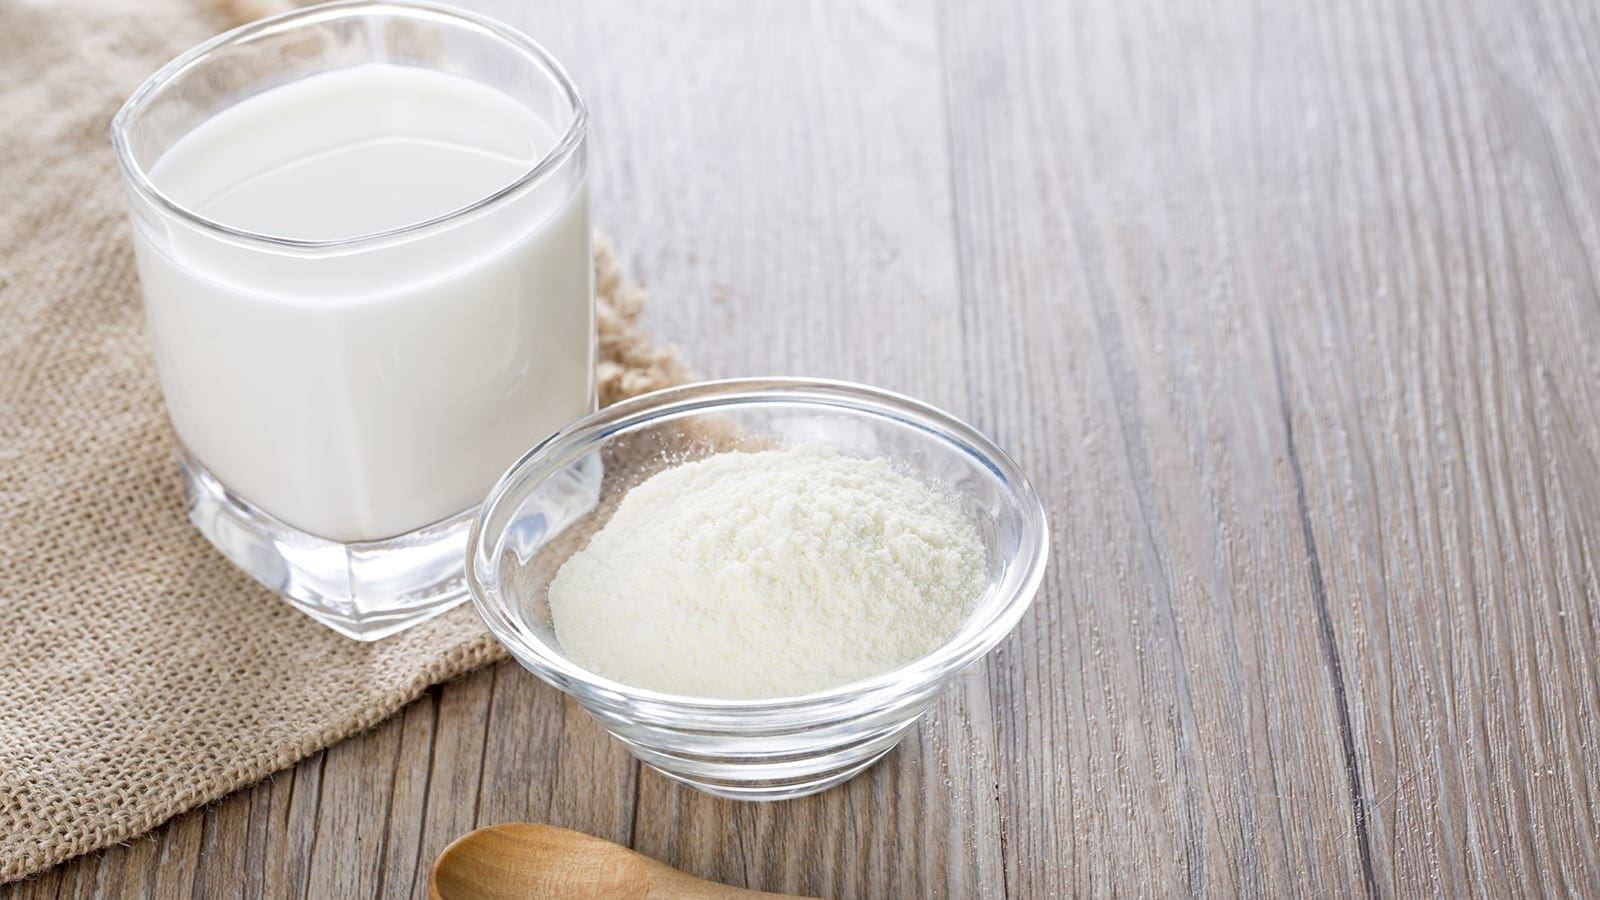 Malawian dairy farmers to benefit from launch of first milk powder processing firm in the country